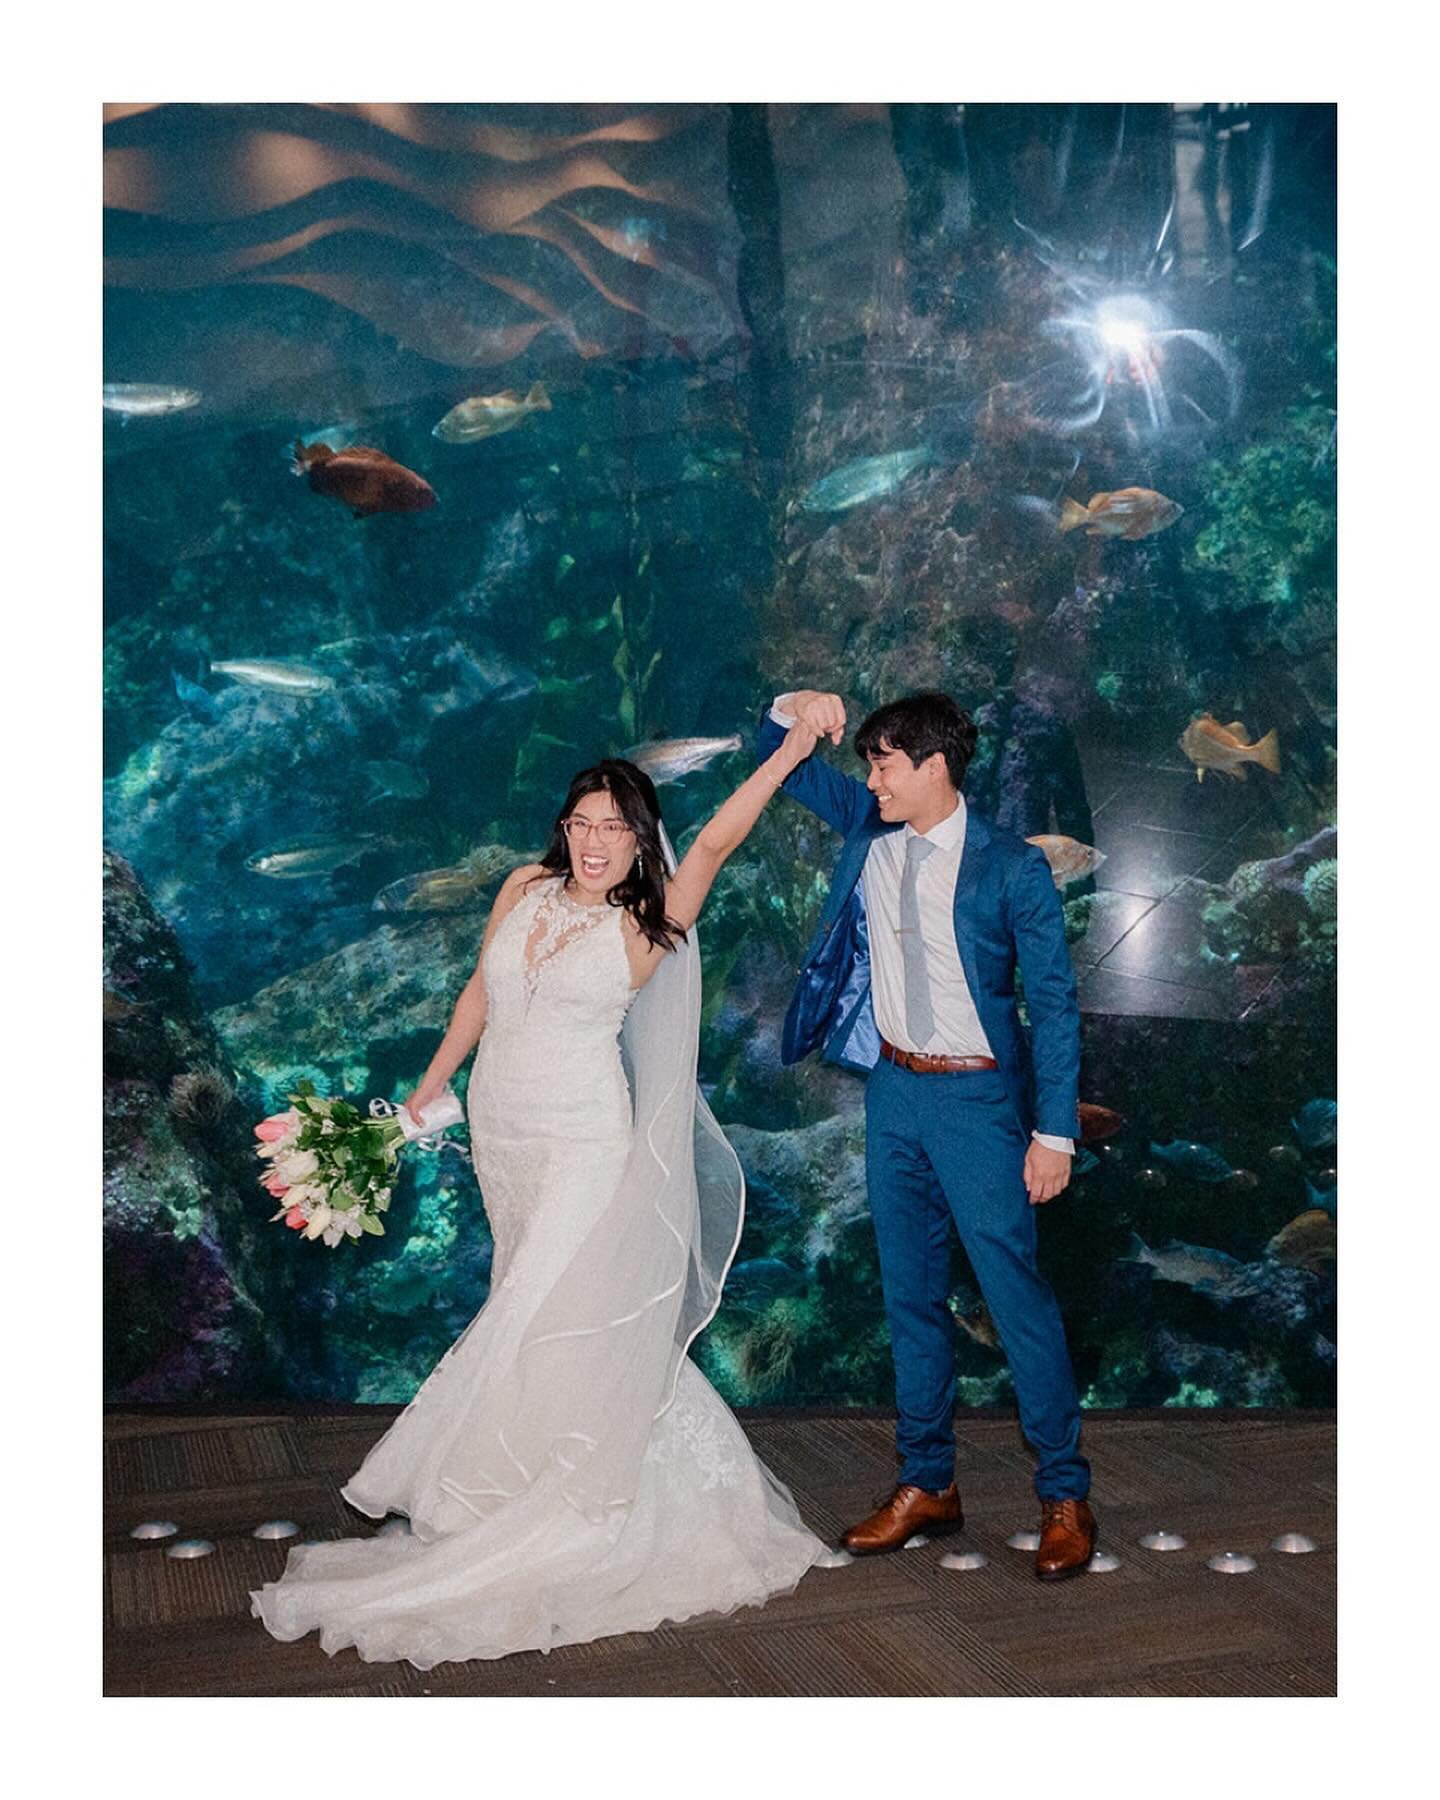 this wedding renewal at the @seattleaquarium was an absolute blast! thank you to j &amp; b for having me!!! 🌊&hearts;️🐟

wedding vendors: 

venue @seattleaquarium 

catering &amp; event staffing/planning @oakviewgroup led by dante! xo 

#seattlewed